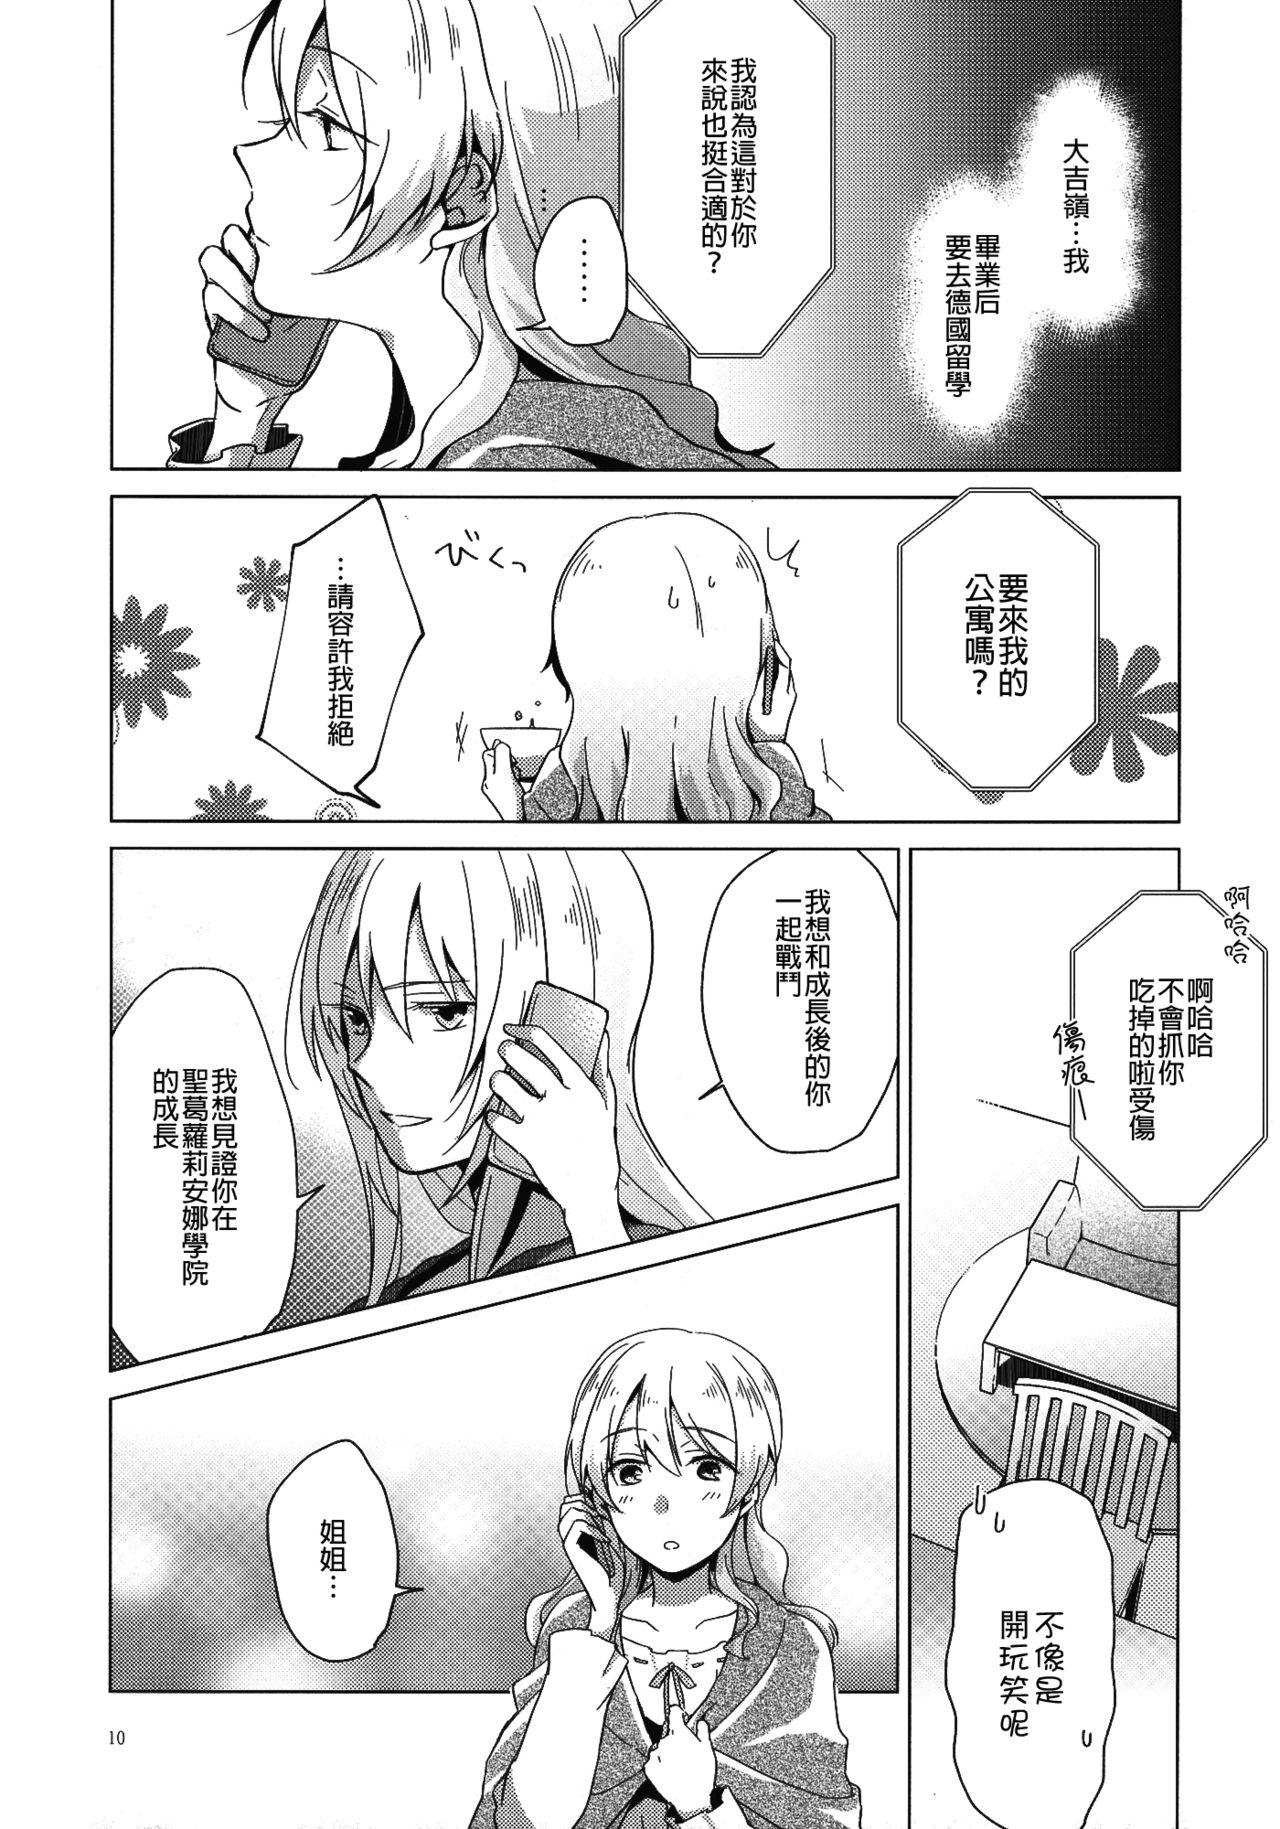 Oral Sex Over Time | 超時 - Girls und panzer Little - Page 10